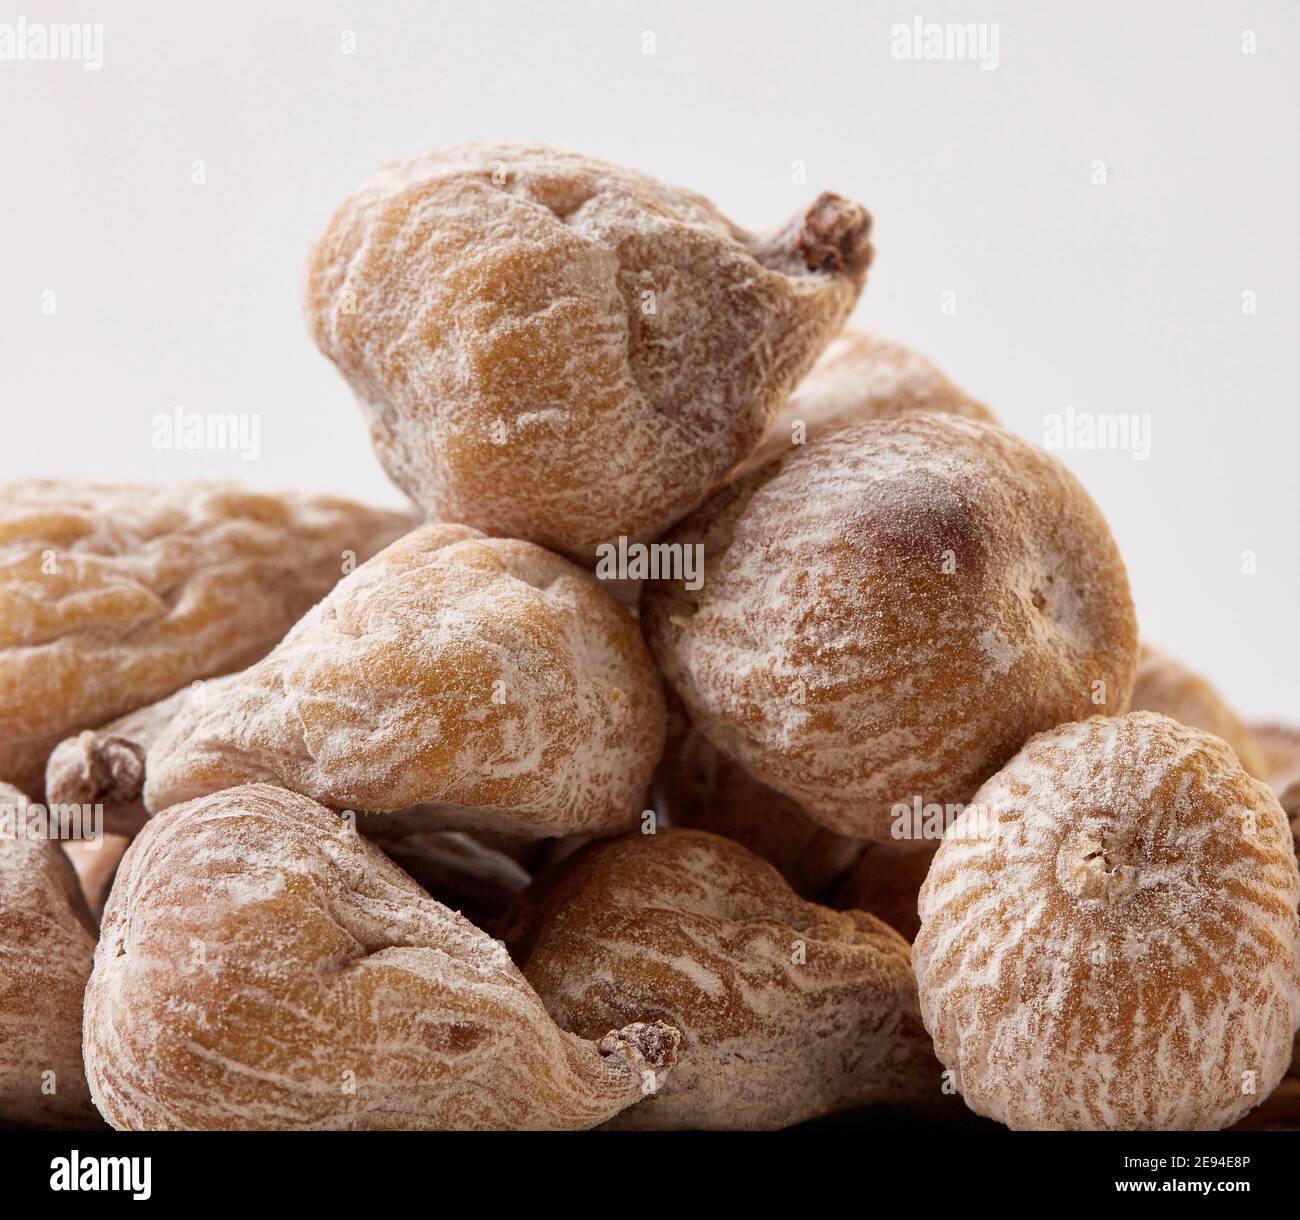 Snack sized dried figs (Higos Secos), convenience and health Stock Photo